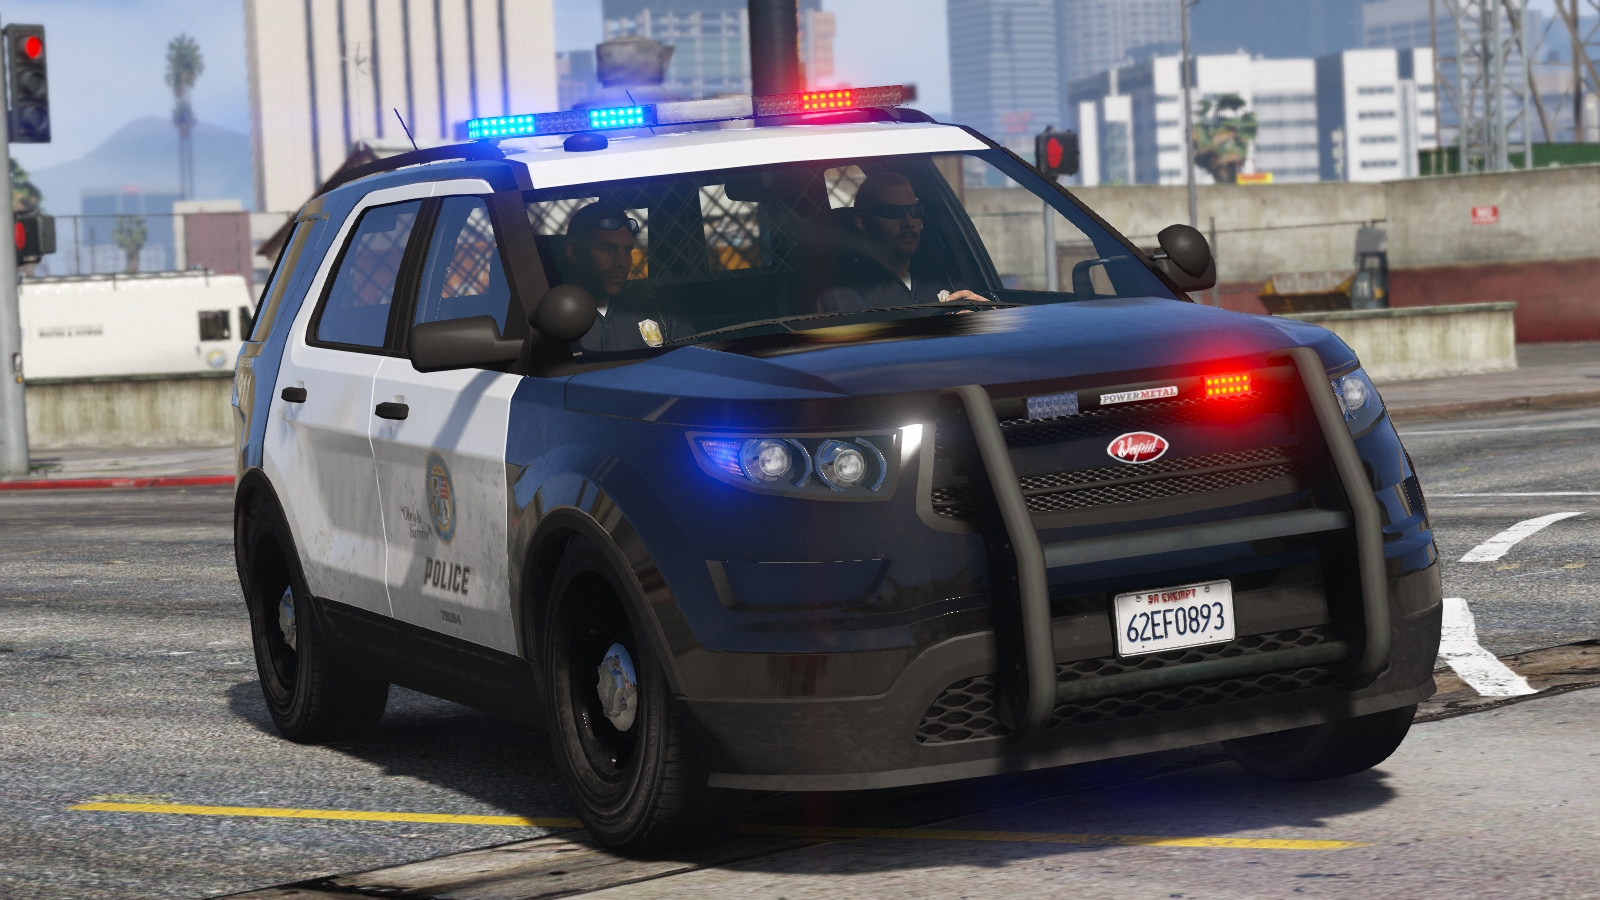 2012 Vapid Scout Police Utility [Add-on | Mapped] - GTA5-Mods.com